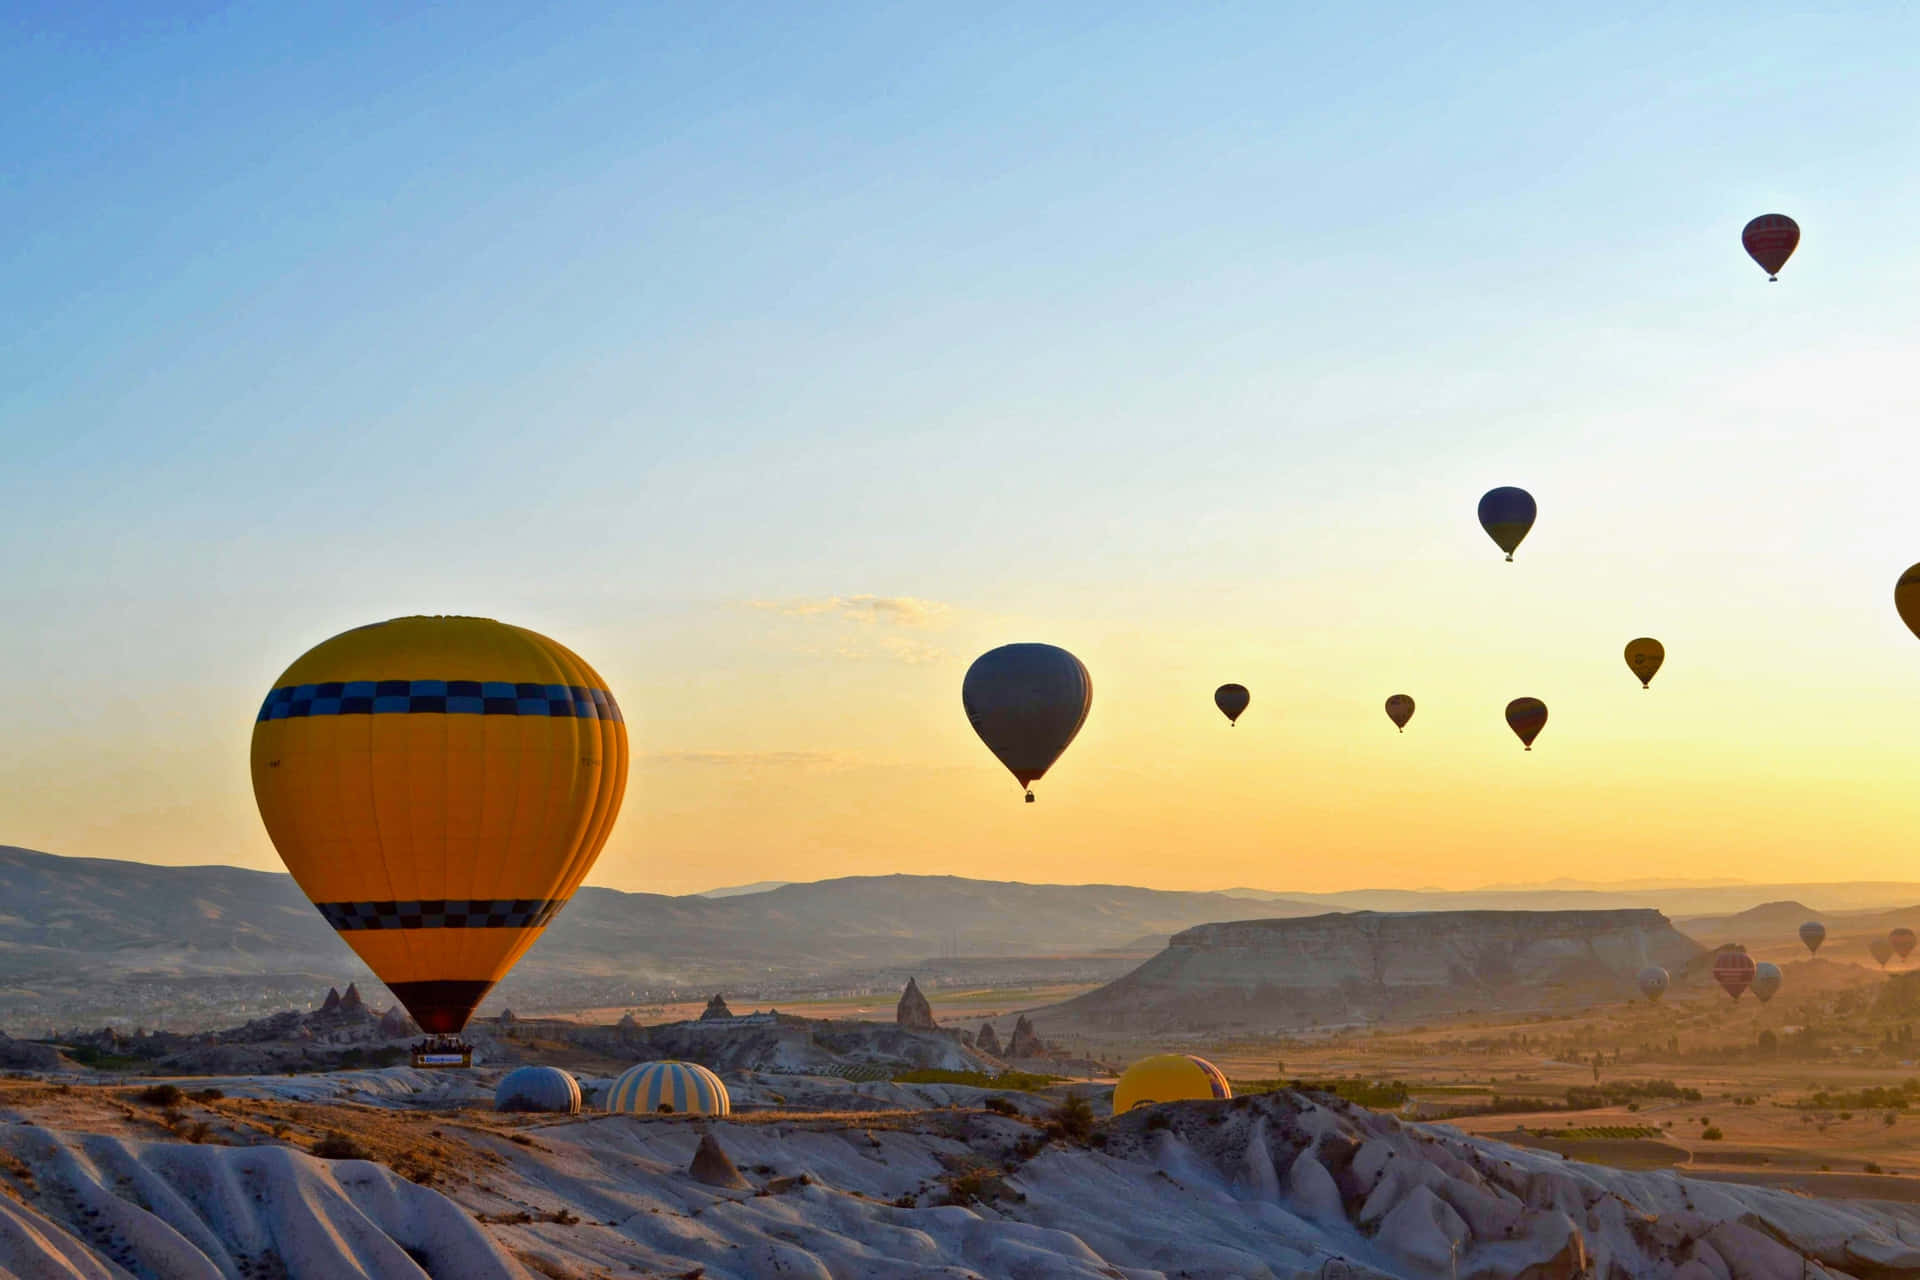 Soar up in the sky with a beautiful hot air balloon flight